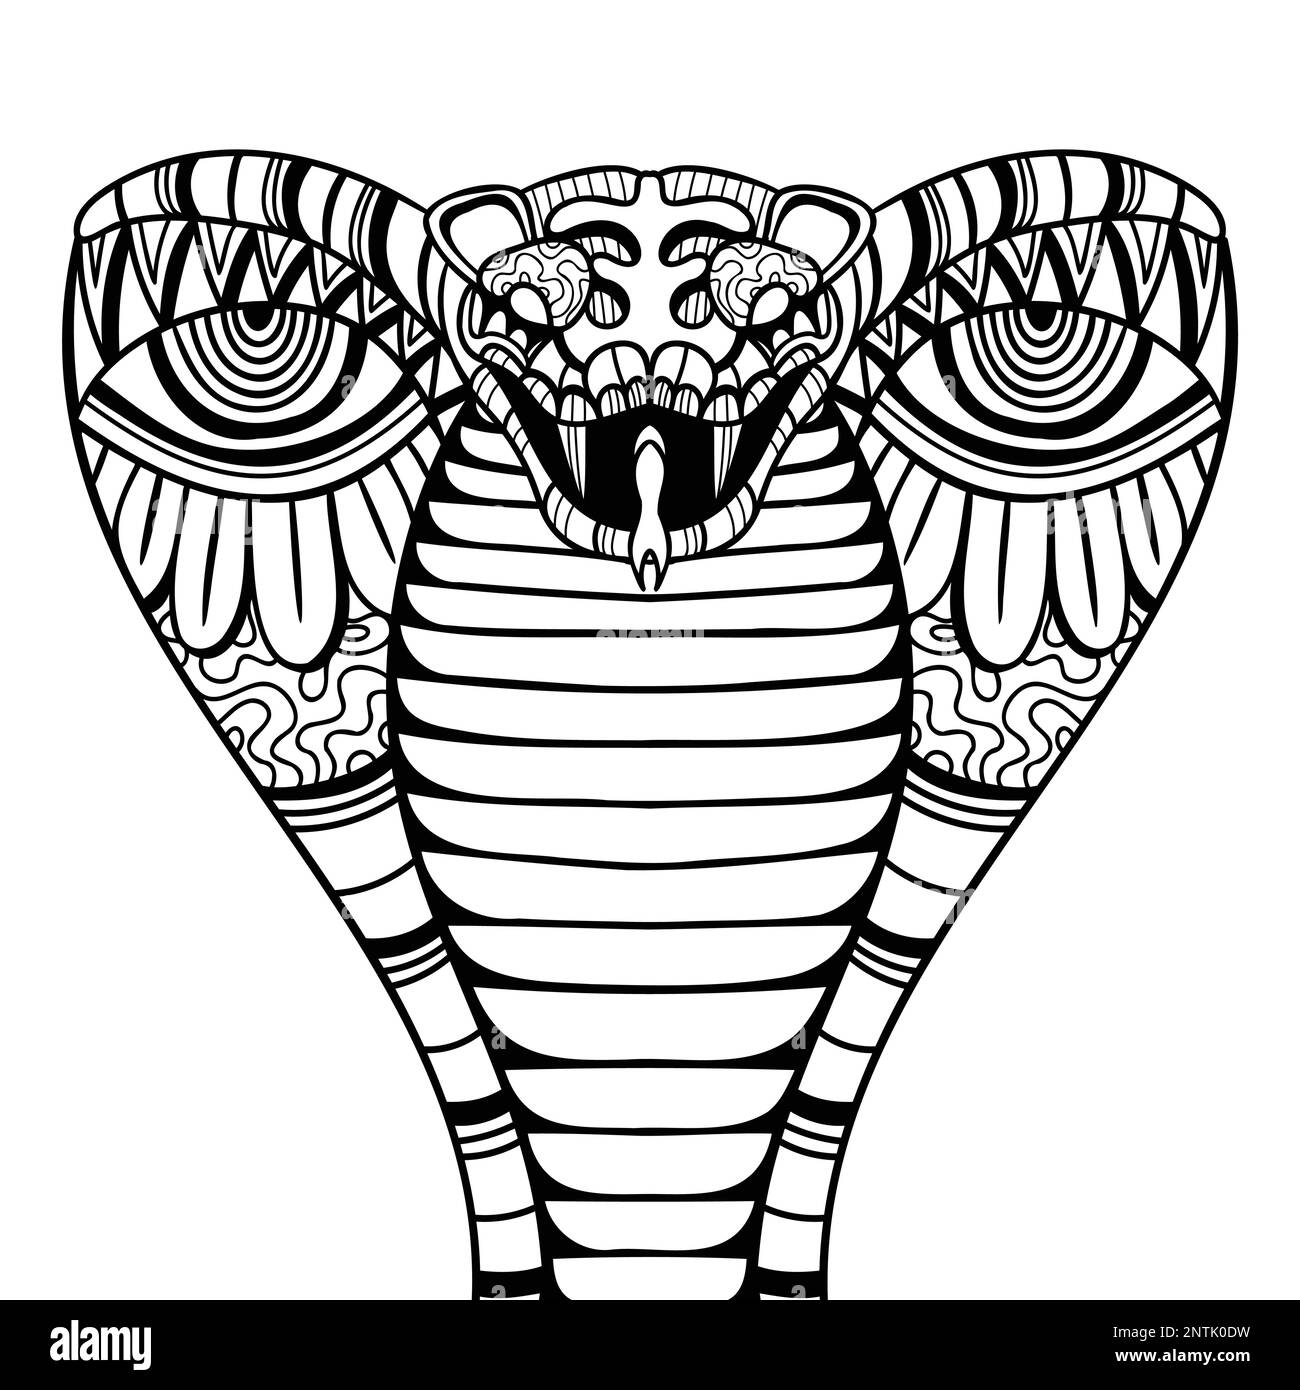 Snake cobra mandala zentangle coloring page illustration for your company or brand Stock Vector